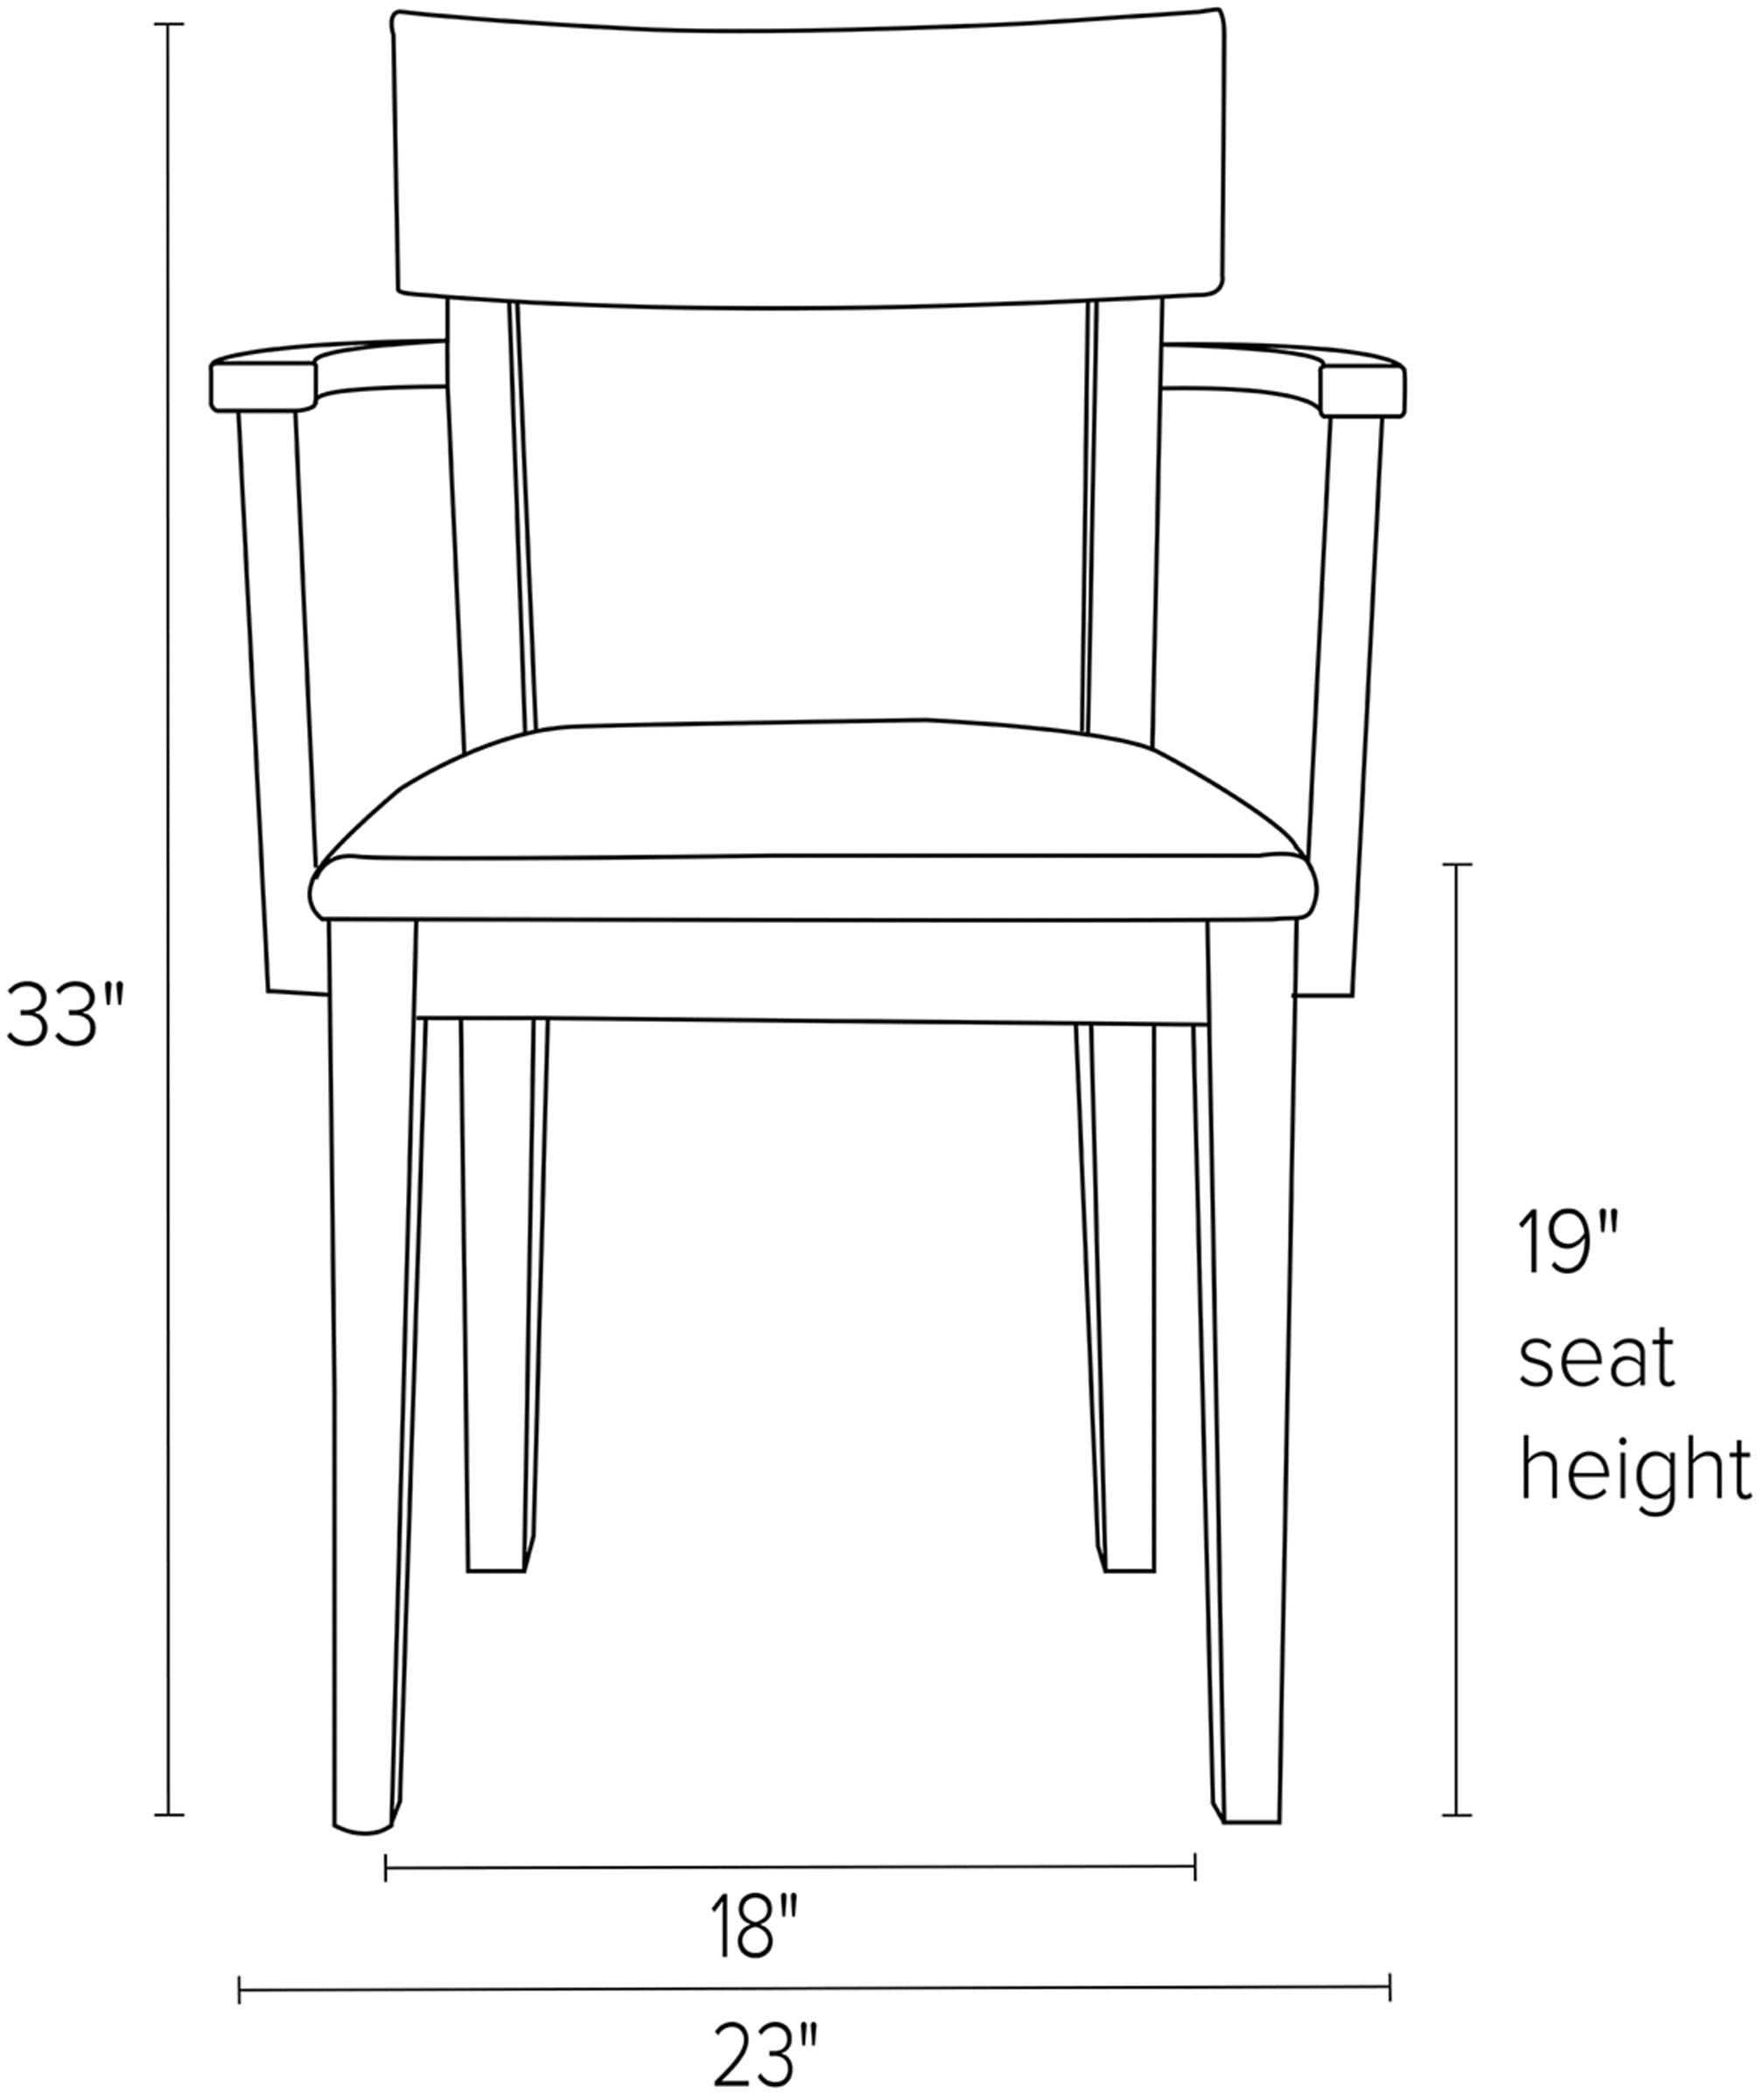 Front view dimension illustration of Doyle arm chair.